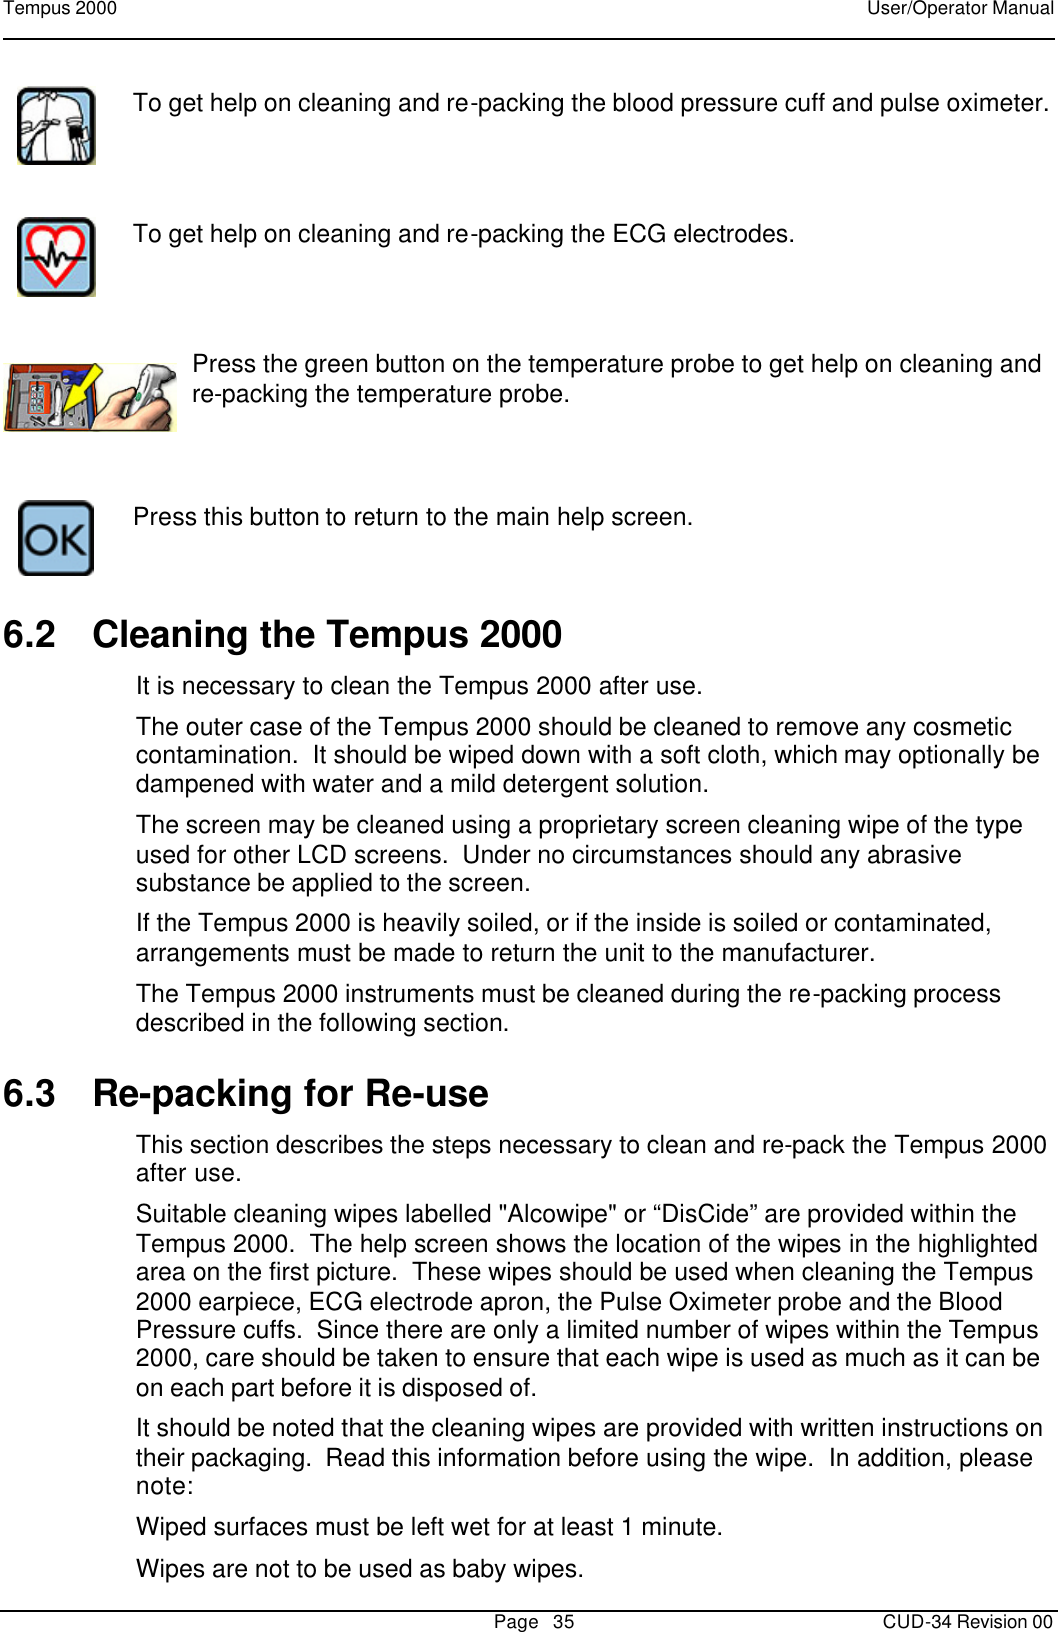 Tempus 2000    User/Operator Manual       Page   35   CUD-34 Revision 00  To get help on cleaning and re-packing the blood pressure cuff and pulse oximeter.      To get help on cleaning and re-packing the ECG electrodes.      Press the green button on the temperature probe to get help on cleaning and re-packing the temperature probe.      Press this button to return to the main help screen. 6.2 Cleaning the Tempus 2000 It is necessary to clean the Tempus 2000 after use.   The outer case of the Tempus 2000 should be cleaned to remove any cosmetic contamination.  It should be wiped down with a soft cloth, which may optionally be dampened with water and a mild detergent solution. The screen may be cleaned using a proprietary screen cleaning wipe of the type used for other LCD screens.  Under no circumstances should any abrasive substance be applied to the screen. If the Tempus 2000 is heavily soiled, or if the inside is soiled or contaminated, arrangements must be made to return the unit to the manufacturer.  The Tempus 2000 instruments must be cleaned during the re-packing process described in the following section.    6.3 Re-packing for Re-use This section describes the steps necessary to clean and re-pack the Tempus 2000 after use. Suitable cleaning wipes labelled &quot;Alcowipe&quot; or “DisCide” are provided within the Tempus 2000.  The help screen shows the location of the wipes in the highlighted area on the first picture.  These wipes should be used when cleaning the Tempus 2000 earpiece, ECG electrode apron, the Pulse Oximeter probe and the Blood Pressure cuffs.  Since there are only a limited number of wipes within the Tempus 2000, care should be taken to ensure that each wipe is used as much as it can be on each part before it is disposed of. It should be noted that the cleaning wipes are provided with written instructions on their packaging.  Read this information before using the wipe.  In addition, please note: Wiped surfaces must be left wet for at least 1 minute. Wipes are not to be used as baby wipes. 